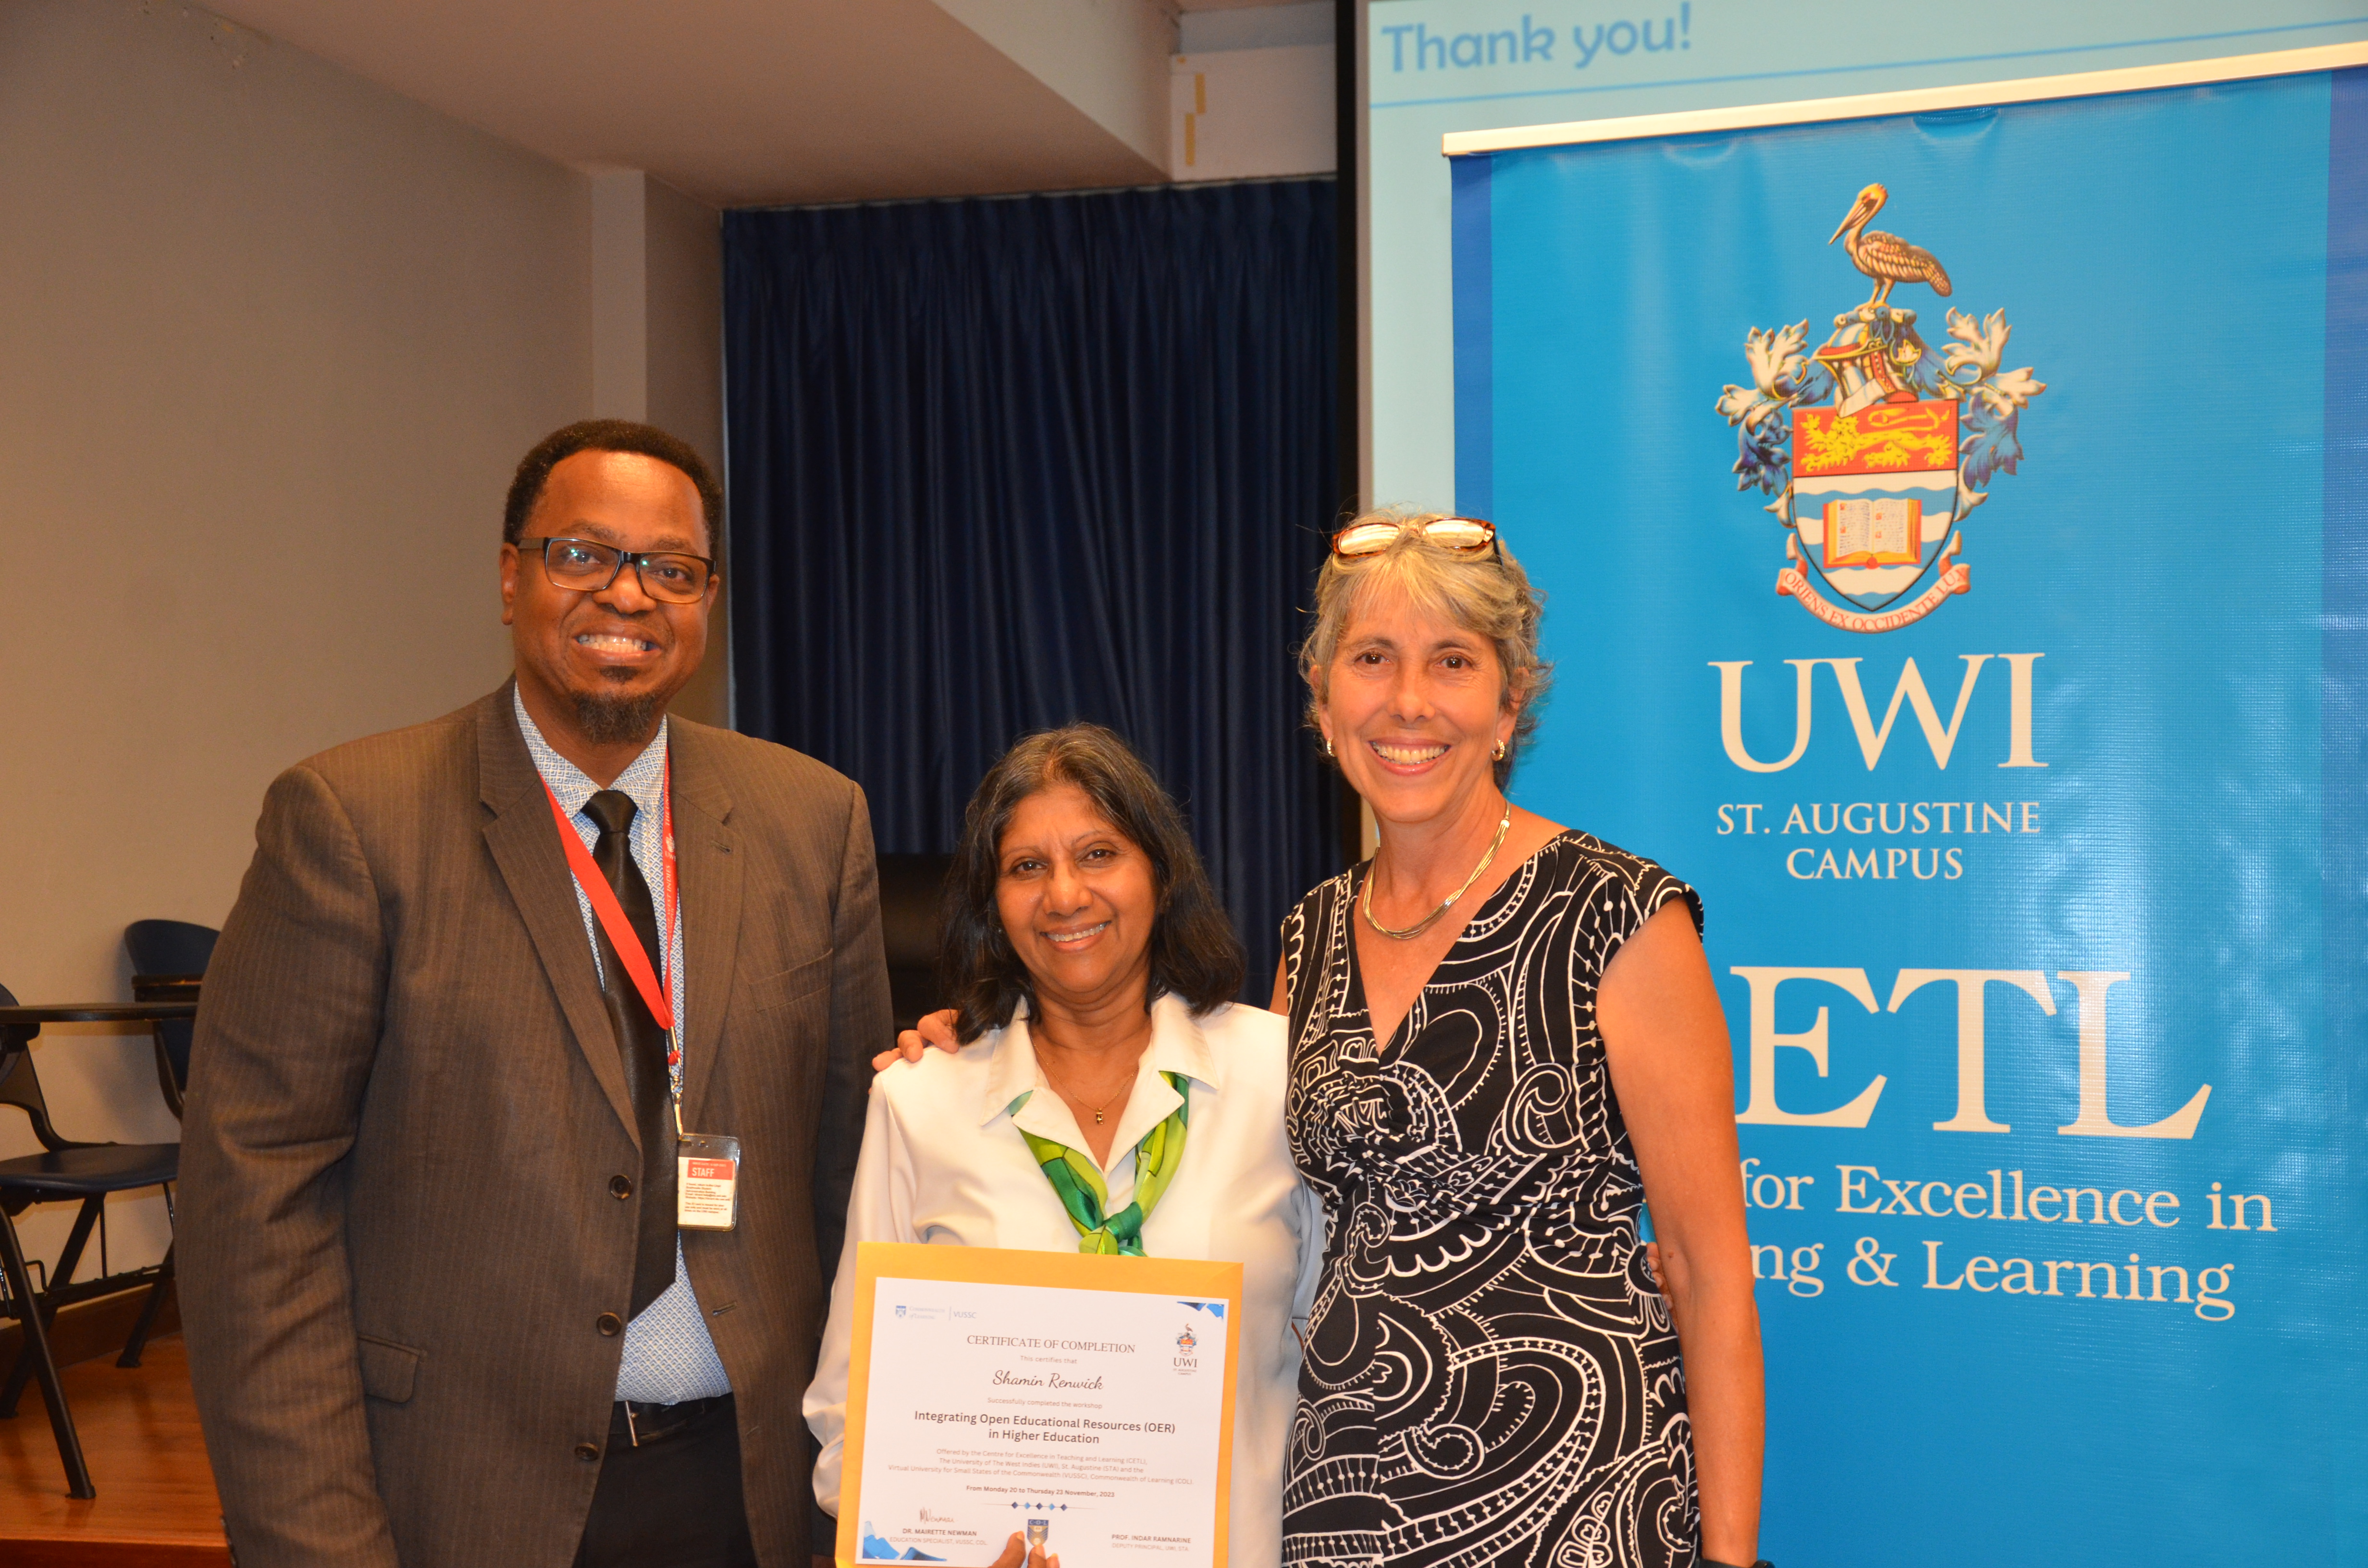 UWI/VUSSC Explore Technology & Resources to Promote Access to Higher Education